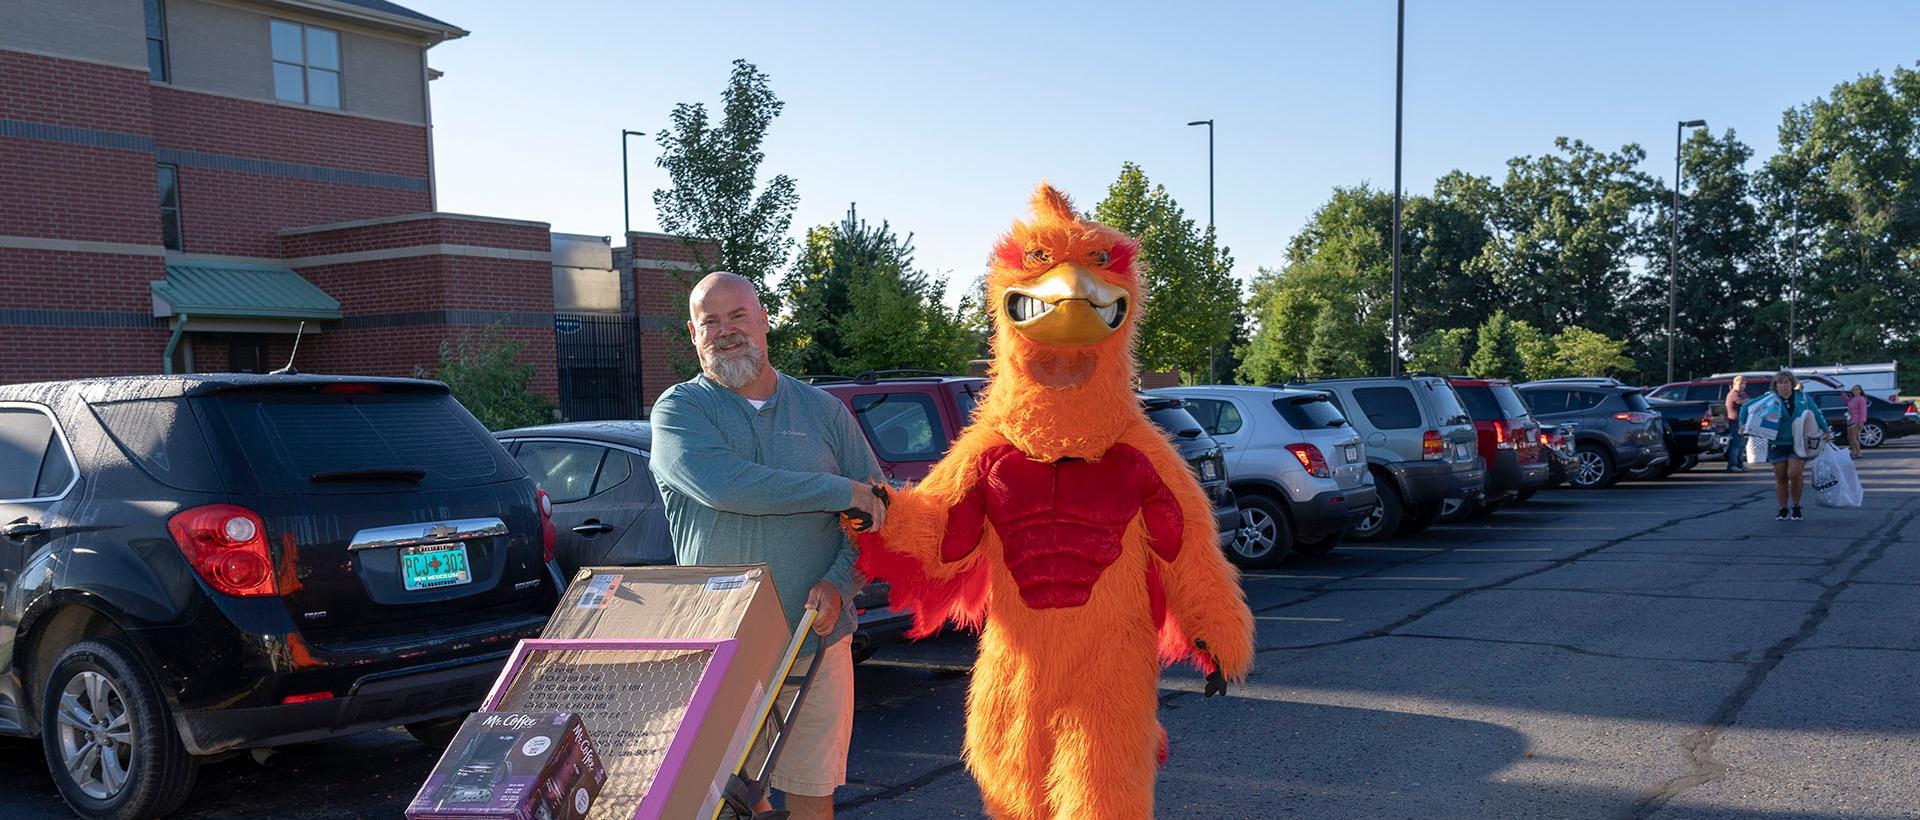 A parent shaking hands with the roadrunner mascot